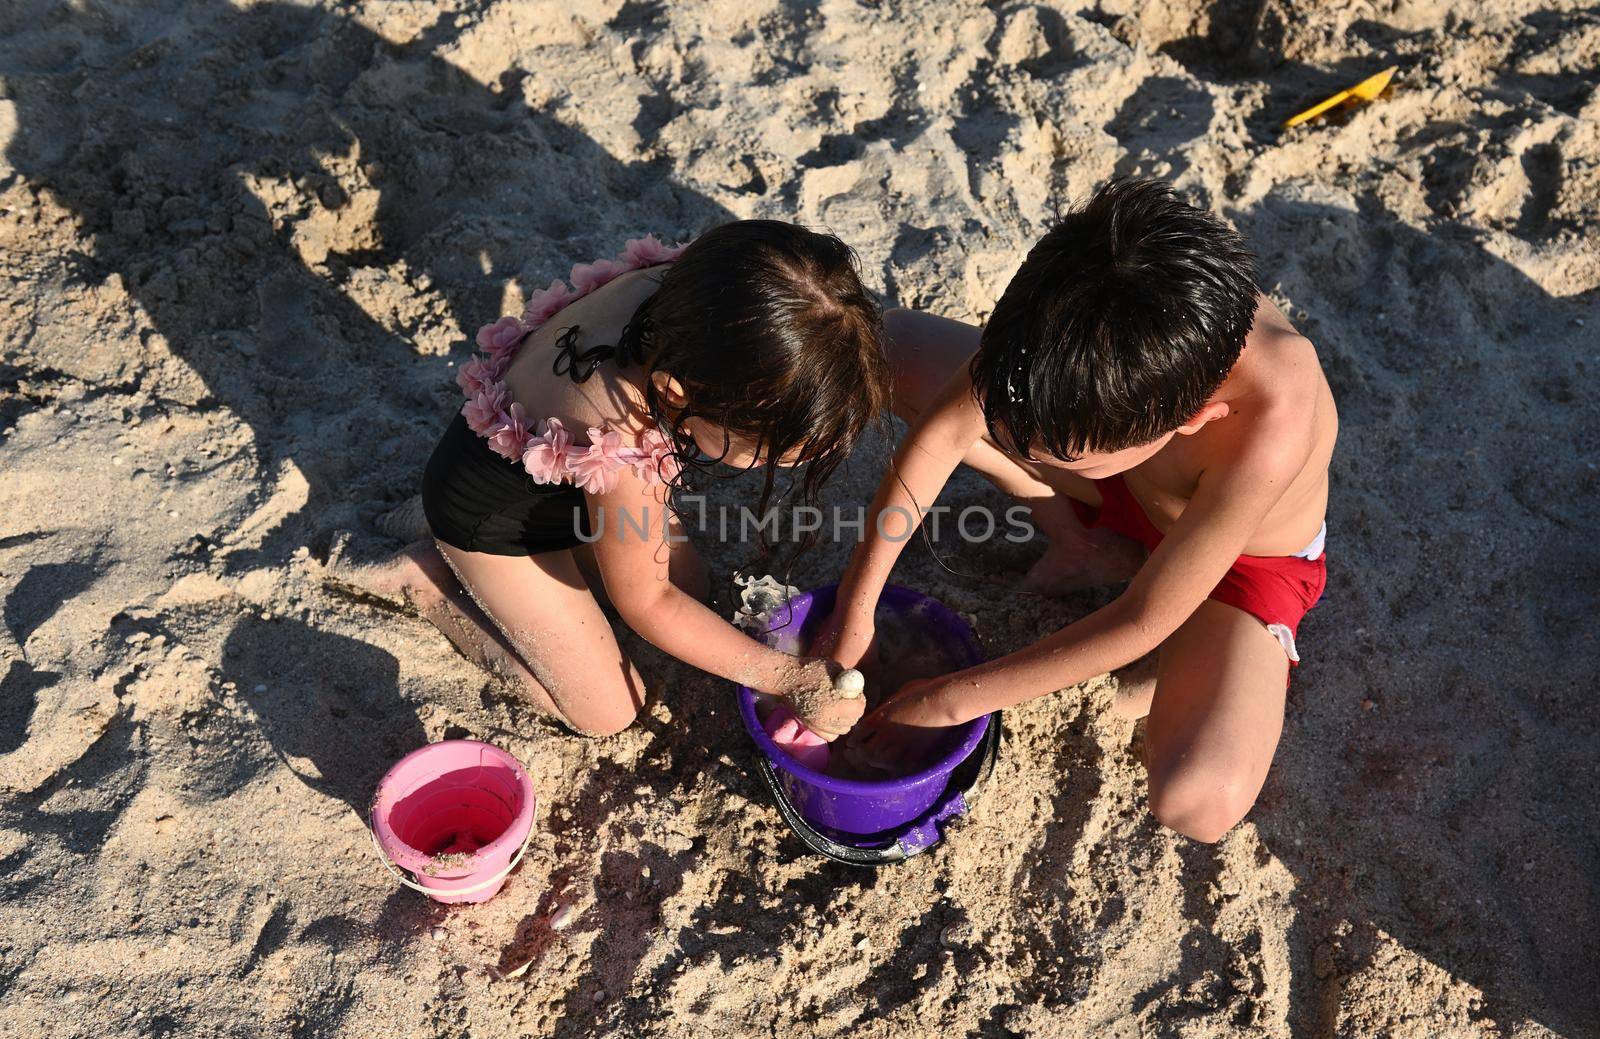 High angle view of children enjoying the construction of sand figures on the beach. Boy and a girl fill a toy plastic bucket with wet sand to build sand castles. Brother and sister having fun during summer vacation